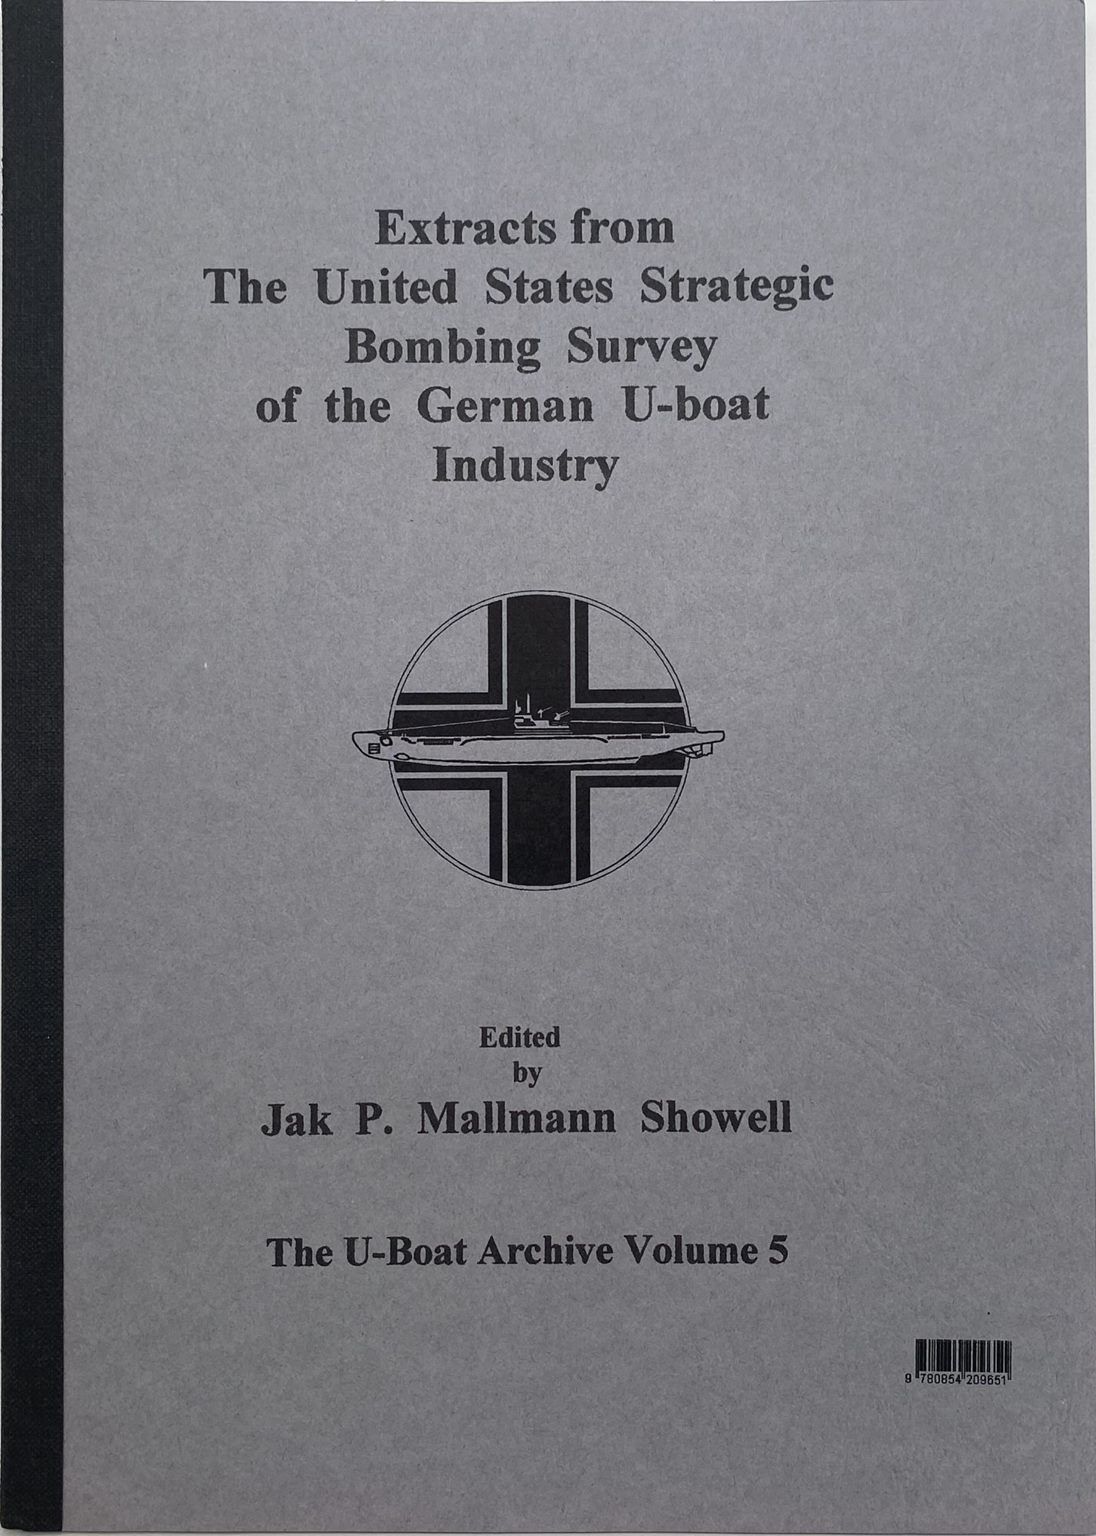 Extracts from the Strategic Bombing Survey of the German U-boat Industry